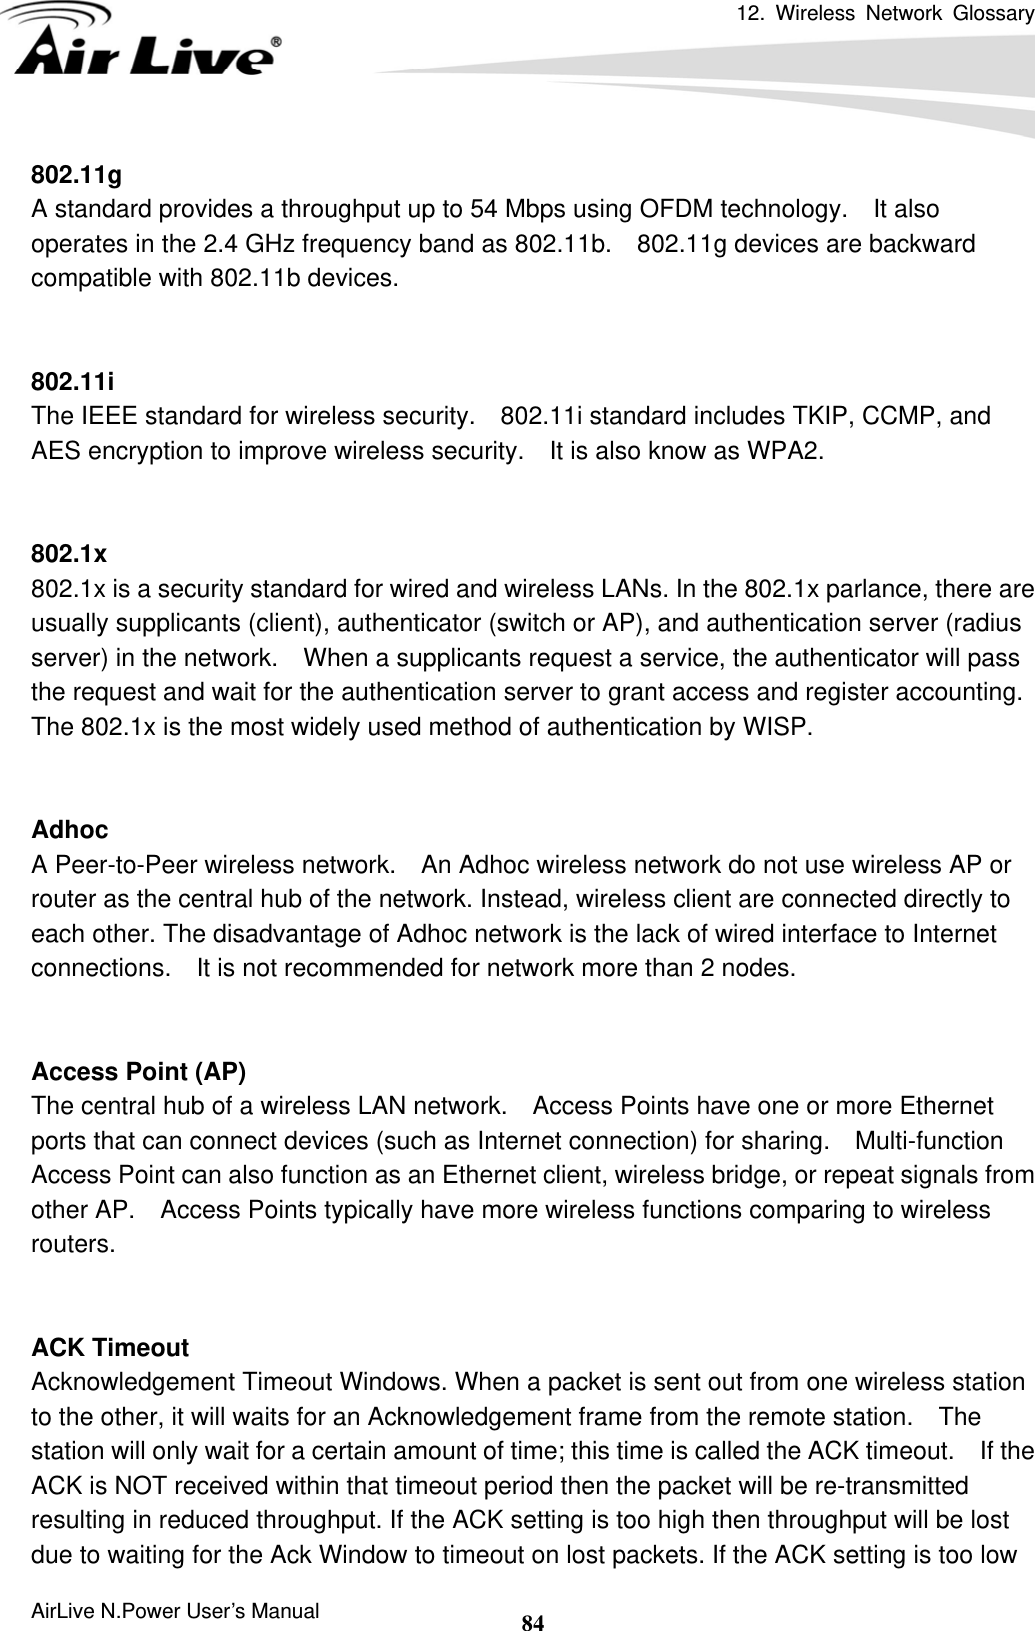 12. Wireless Network Glossary      AirLive N.Power User’s Manual  84802.11g A standard provides a throughput up to 54 Mbps using OFDM technology.    It also operates in the 2.4 GHz frequency band as 802.11b.    802.11g devices are backward compatible with 802.11b devices.   802.11i The IEEE standard for wireless security.    802.11i standard includes TKIP, CCMP, and AES encryption to improve wireless security.    It is also know as WPA2.   802.1x 802.1x is a security standard for wired and wireless LANs. In the 802.1x parlance, there are usually supplicants (client), authenticator (switch or AP), and authentication server (radius server) in the network.    When a supplicants request a service, the authenticator will pass the request and wait for the authentication server to grant access and register accounting.   The 802.1x is the most widely used method of authentication by WISP.   Adhoc A Peer-to-Peer wireless network.    An Adhoc wireless network do not use wireless AP or router as the central hub of the network. Instead, wireless client are connected directly to each other. The disadvantage of Adhoc network is the lack of wired interface to Internet connections.    It is not recommended for network more than 2 nodes.   Access Point (AP) The central hub of a wireless LAN network.    Access Points have one or more Ethernet ports that can connect devices (such as Internet connection) for sharing.    Multi-function Access Point can also function as an Ethernet client, wireless bridge, or repeat signals from other AP.    Access Points typically have more wireless functions comparing to wireless routers.   ACK Timeout Acknowledgement Timeout Windows. When a packet is sent out from one wireless station to the other, it will waits for an Acknowledgement frame from the remote station.  The station will only wait for a certain amount of time; this time is called the ACK timeout.    If the ACK is NOT received within that timeout period then the packet will be re-transmitted resulting in reduced throughput. If the ACK setting is too high then throughput will be lost due to waiting for the Ack Window to timeout on lost packets. If the ACK setting is too low 